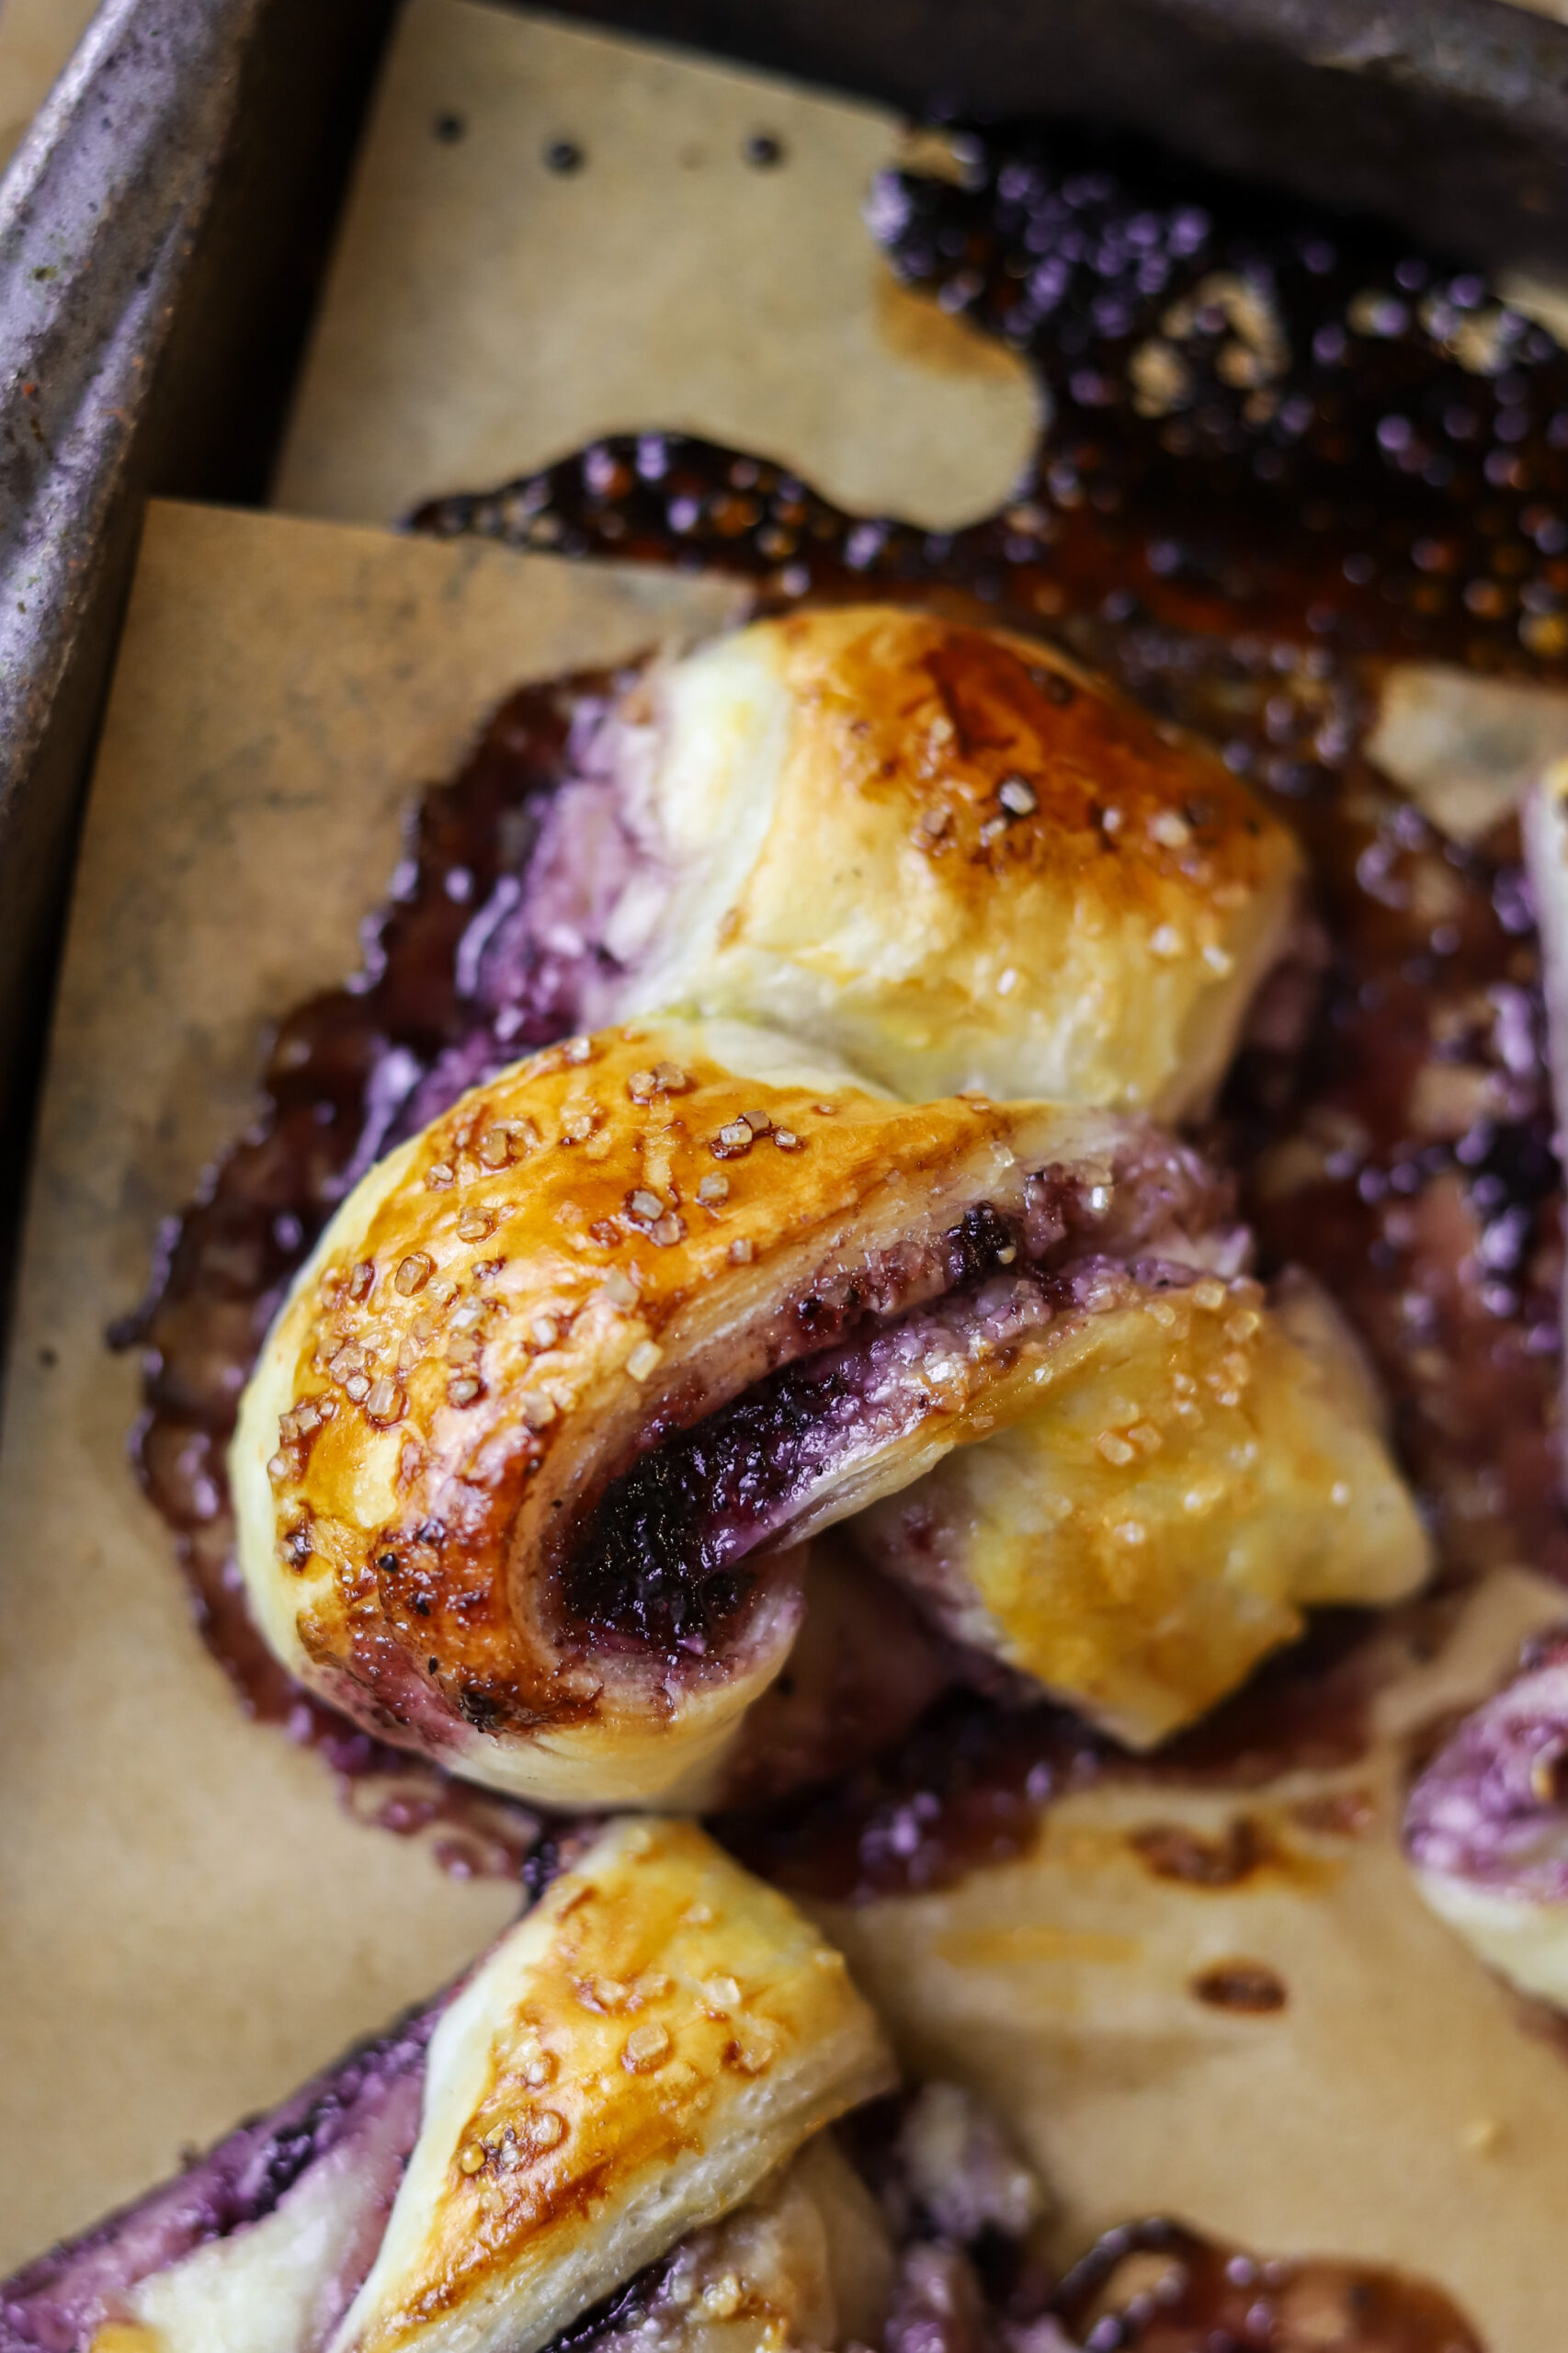 Blueberry Cream Cheese Puffy Pastry Knots